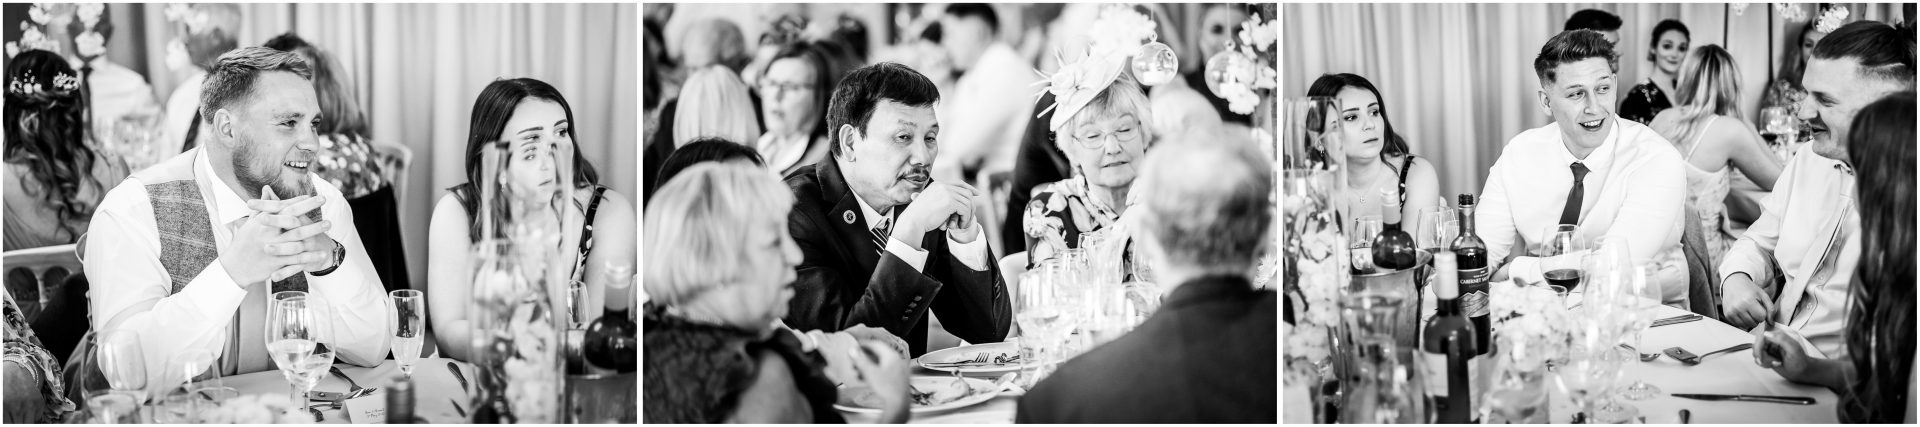 Candid wedding guests photography in Hampshire